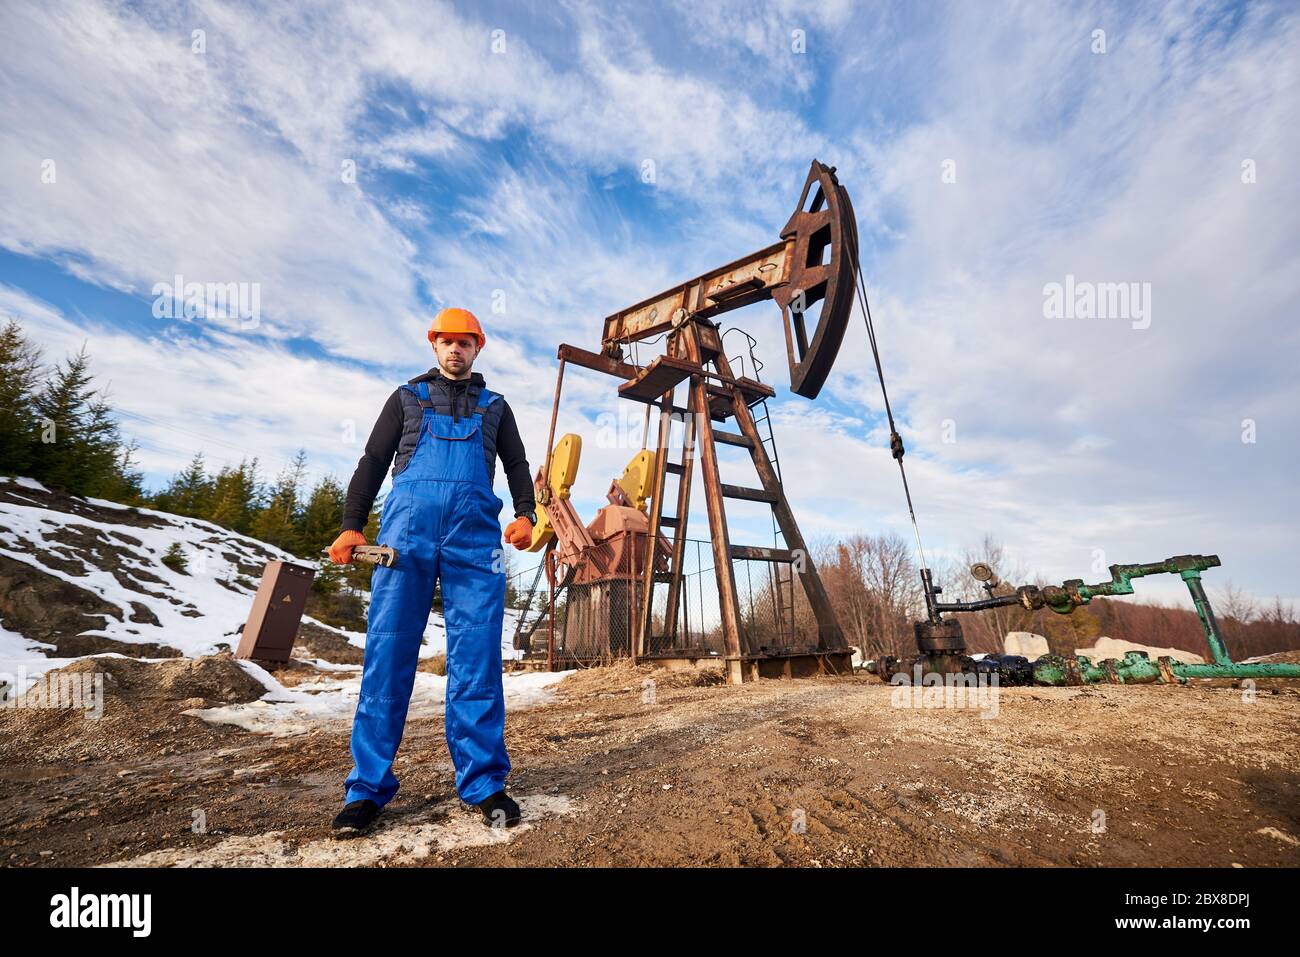 Oil worker during his working day in oil field, man wearing blue overalls and orange helmet, holding pipe wrench, looking at camera under beautiful sky. Concept of oil extraction, petroleum industry. Stock Photo